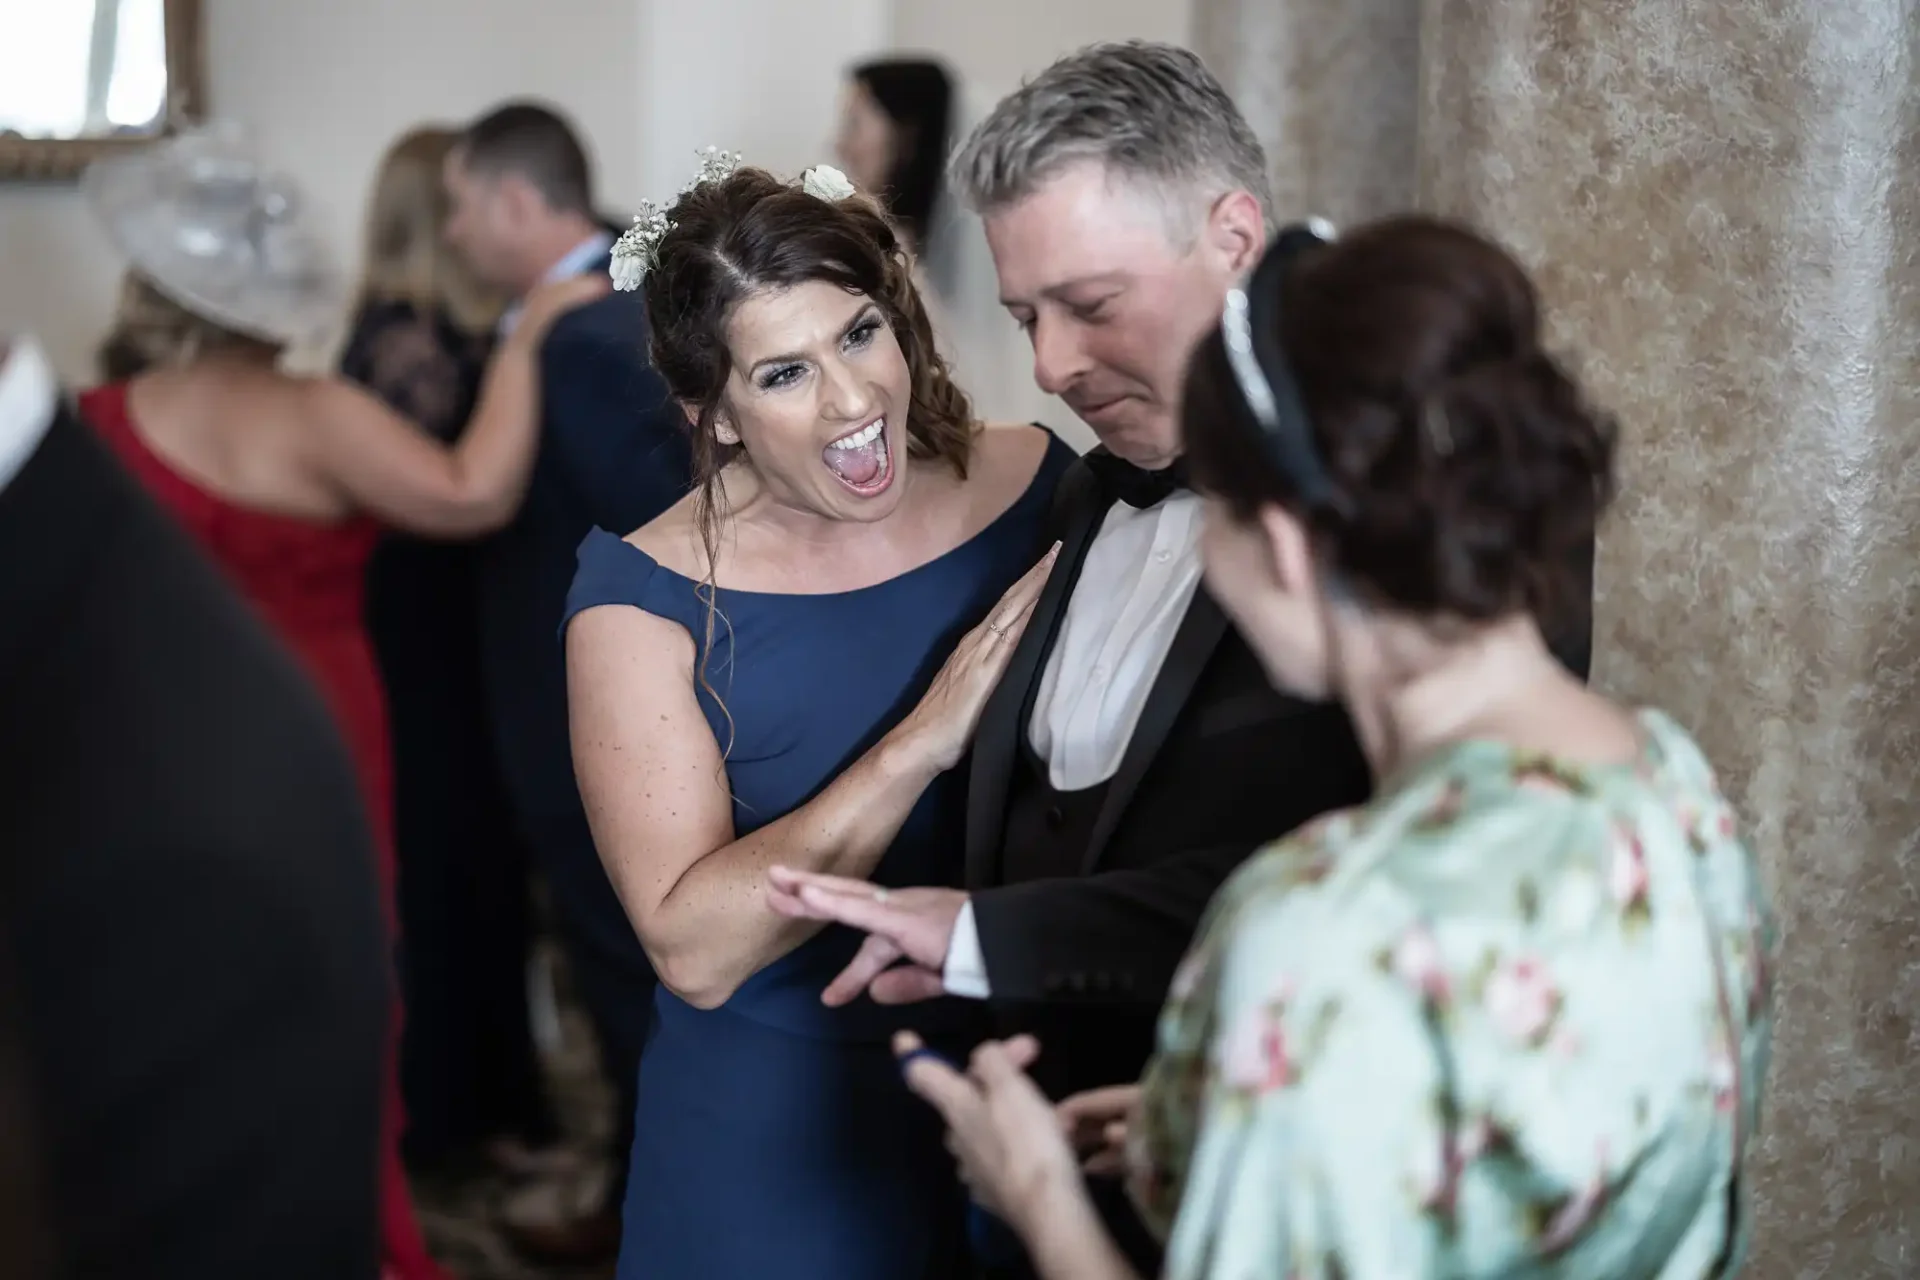 Woman in a blue dress playfully shows her muscle to a smiling man in a tuxedo, while another woman in a floral dress watches at a social event.